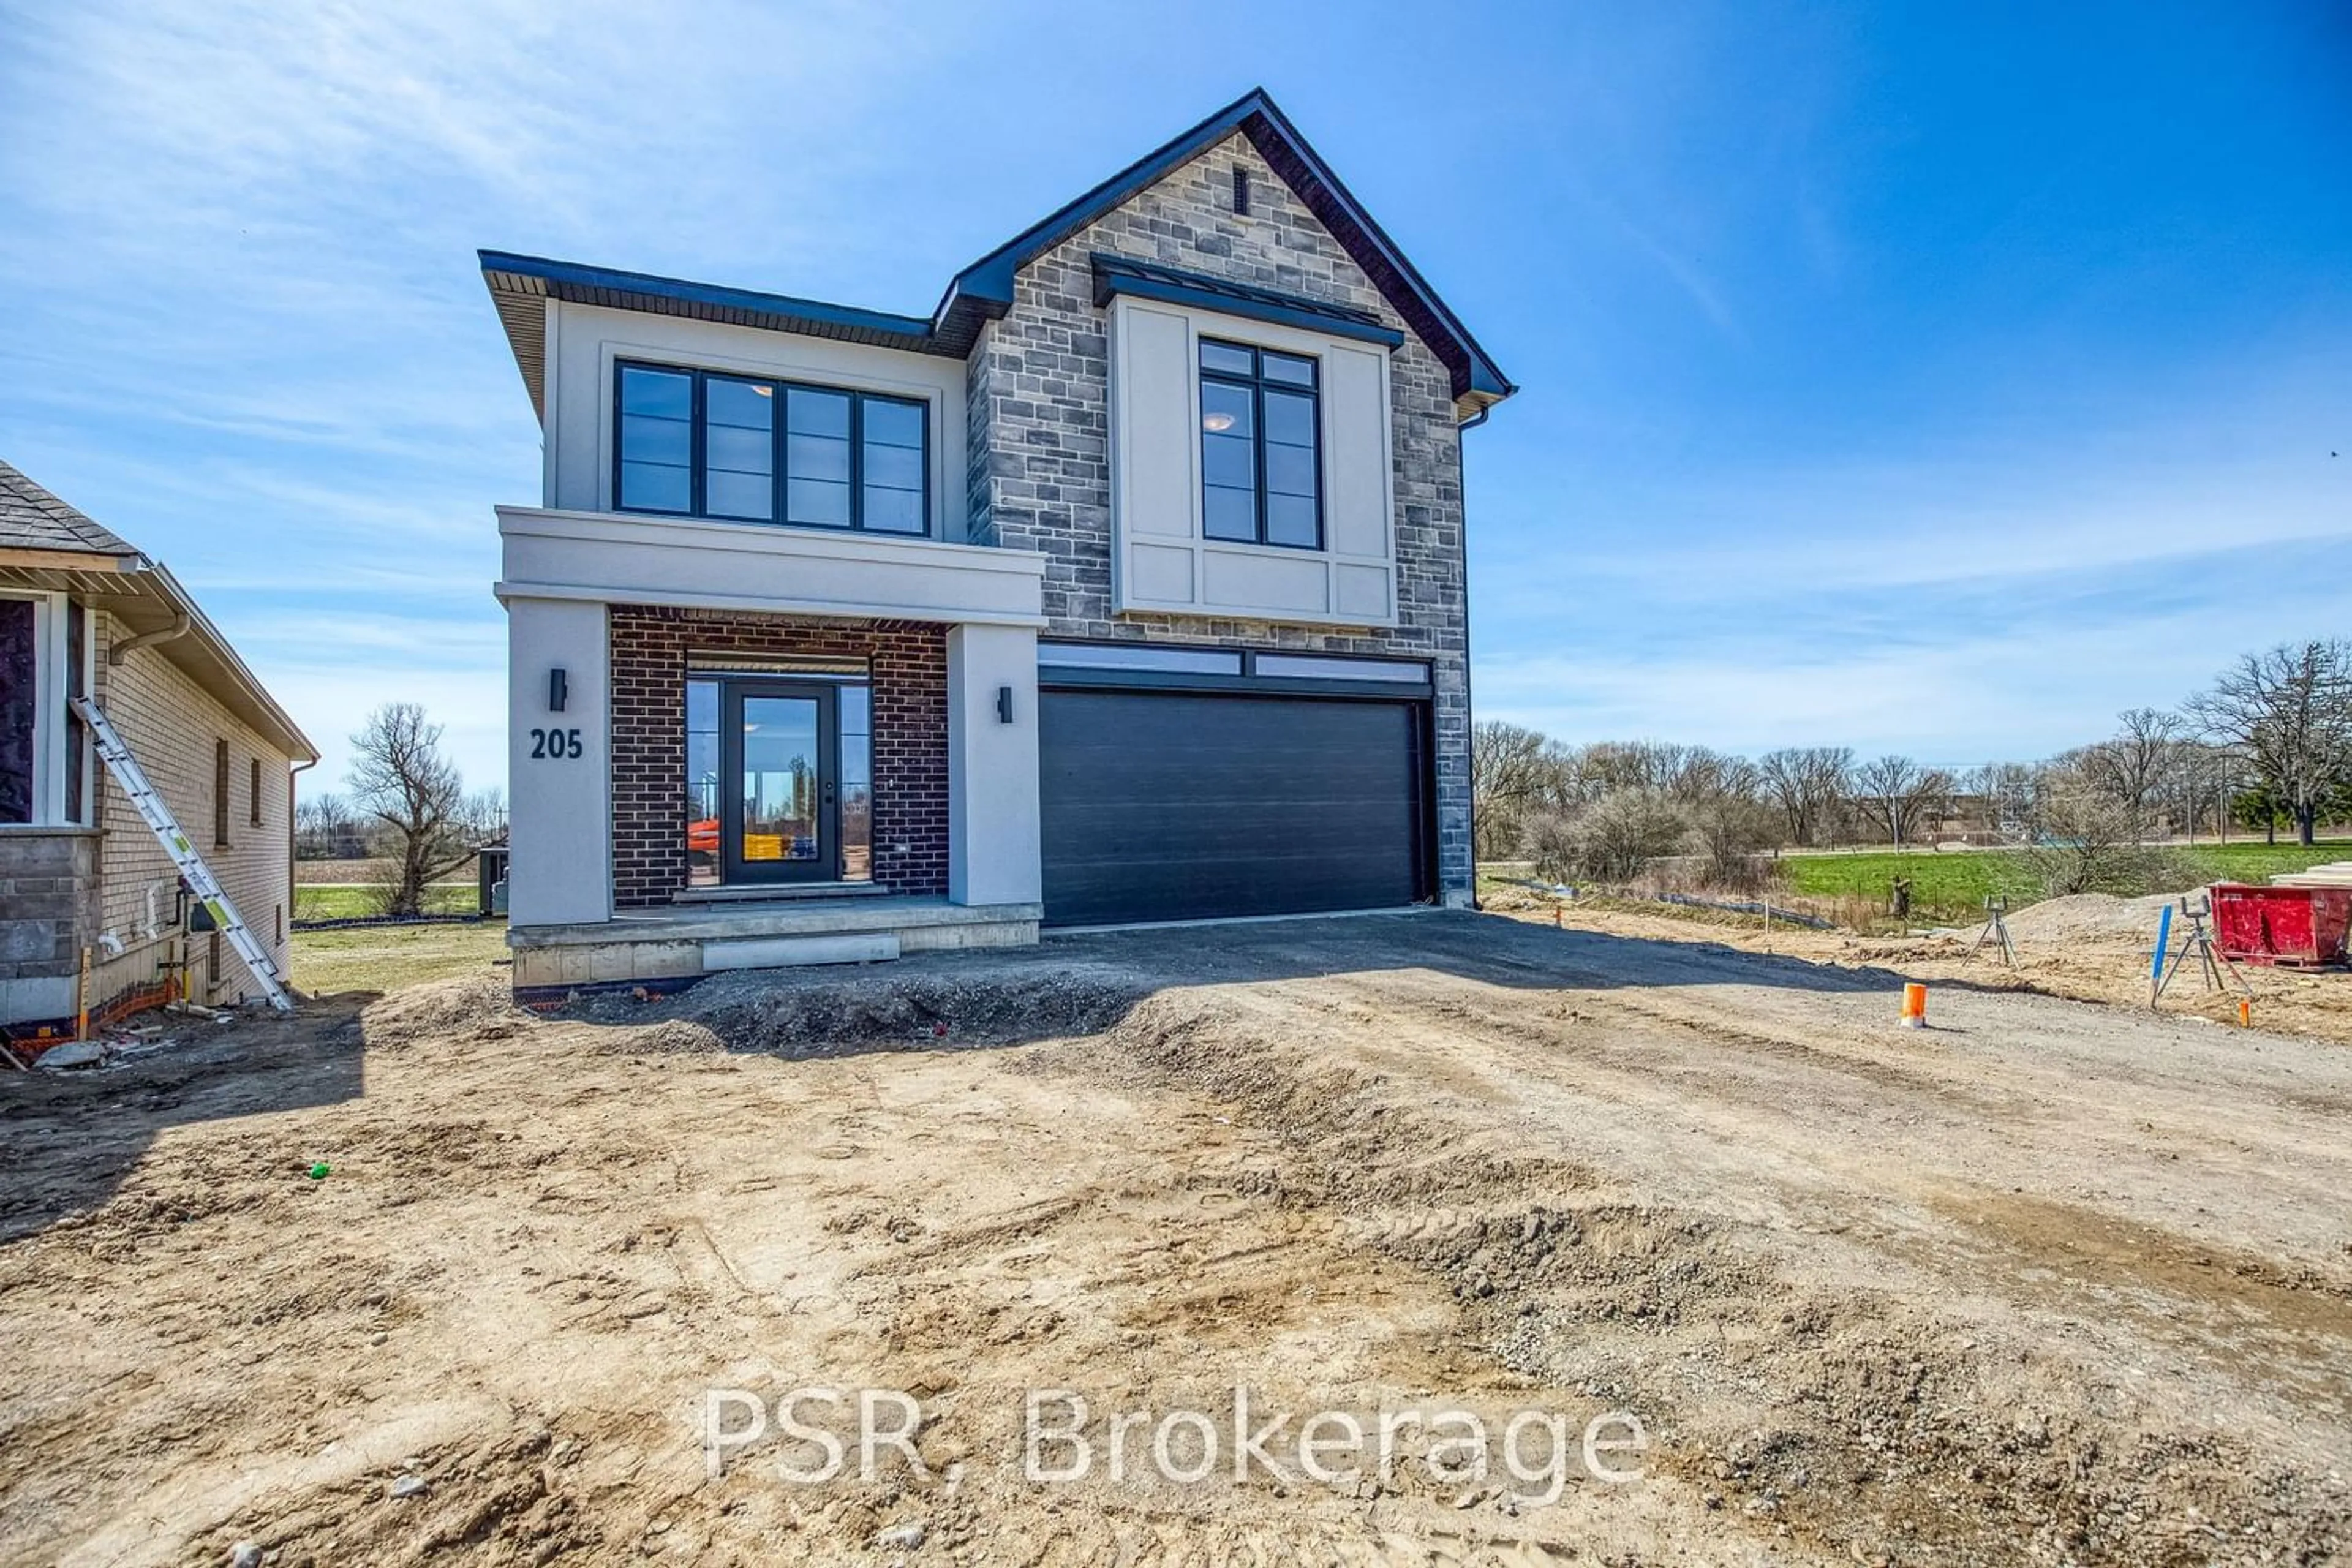 Frontside or backside of a home for Lot 24 205 Dempsey Dr, Stratford Ontario N5A 0K5